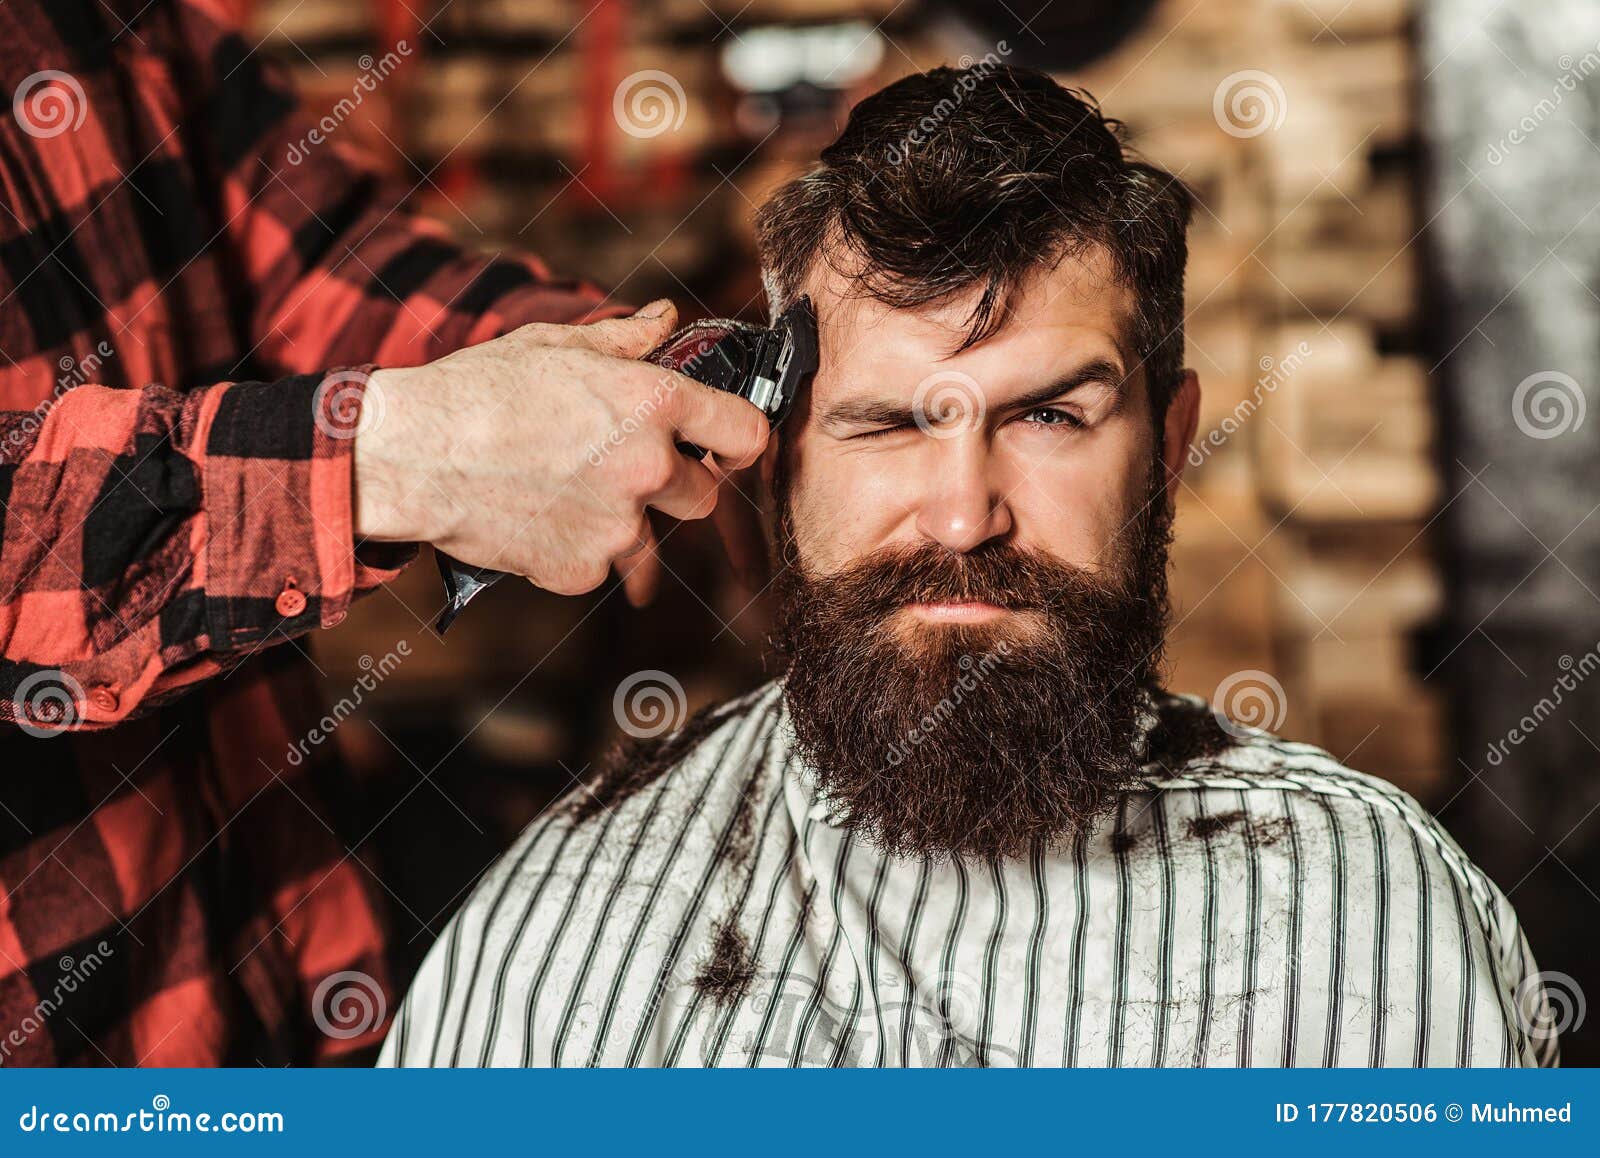 Bearded Handsome Man Visiting Hairstylist. Barber Shop. Barber Shearing ...